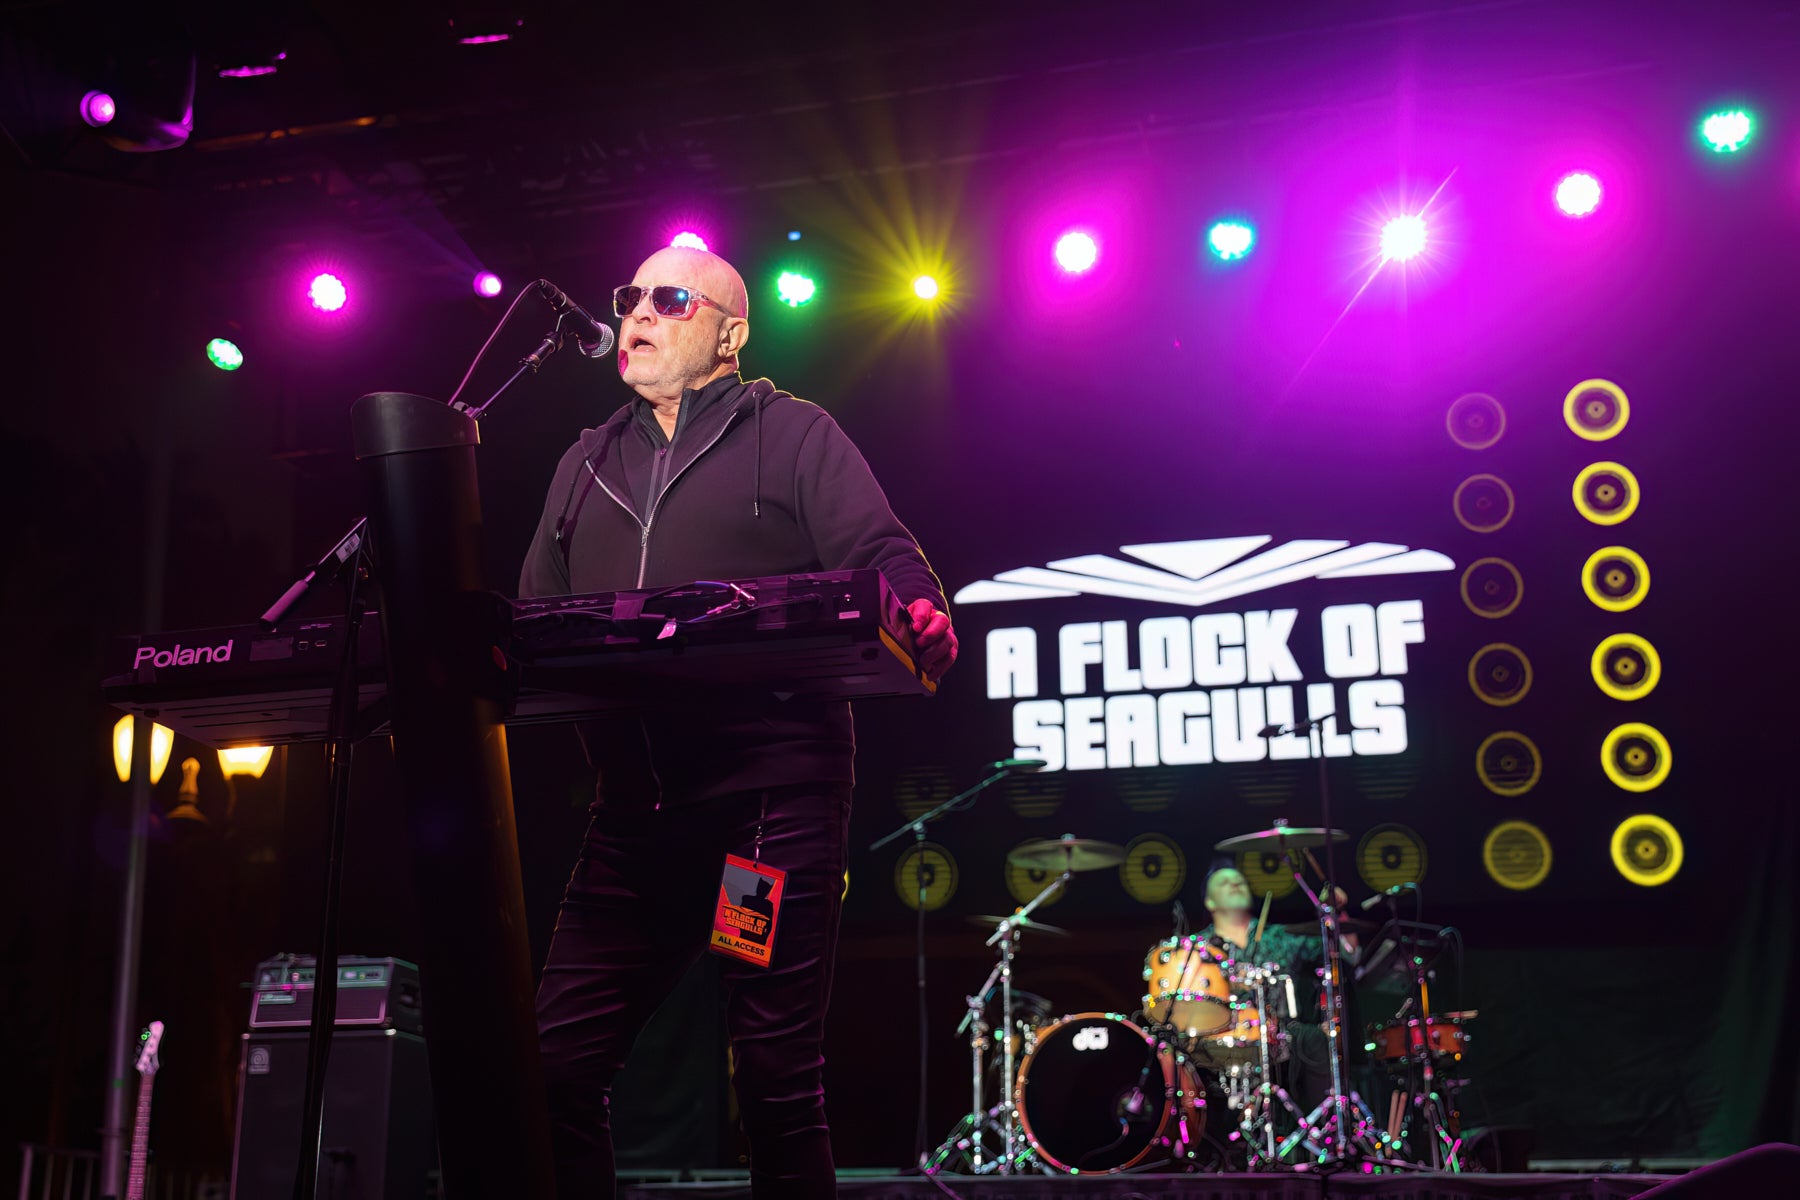 A photo of the band A Flock of Seagulls performing at USC.